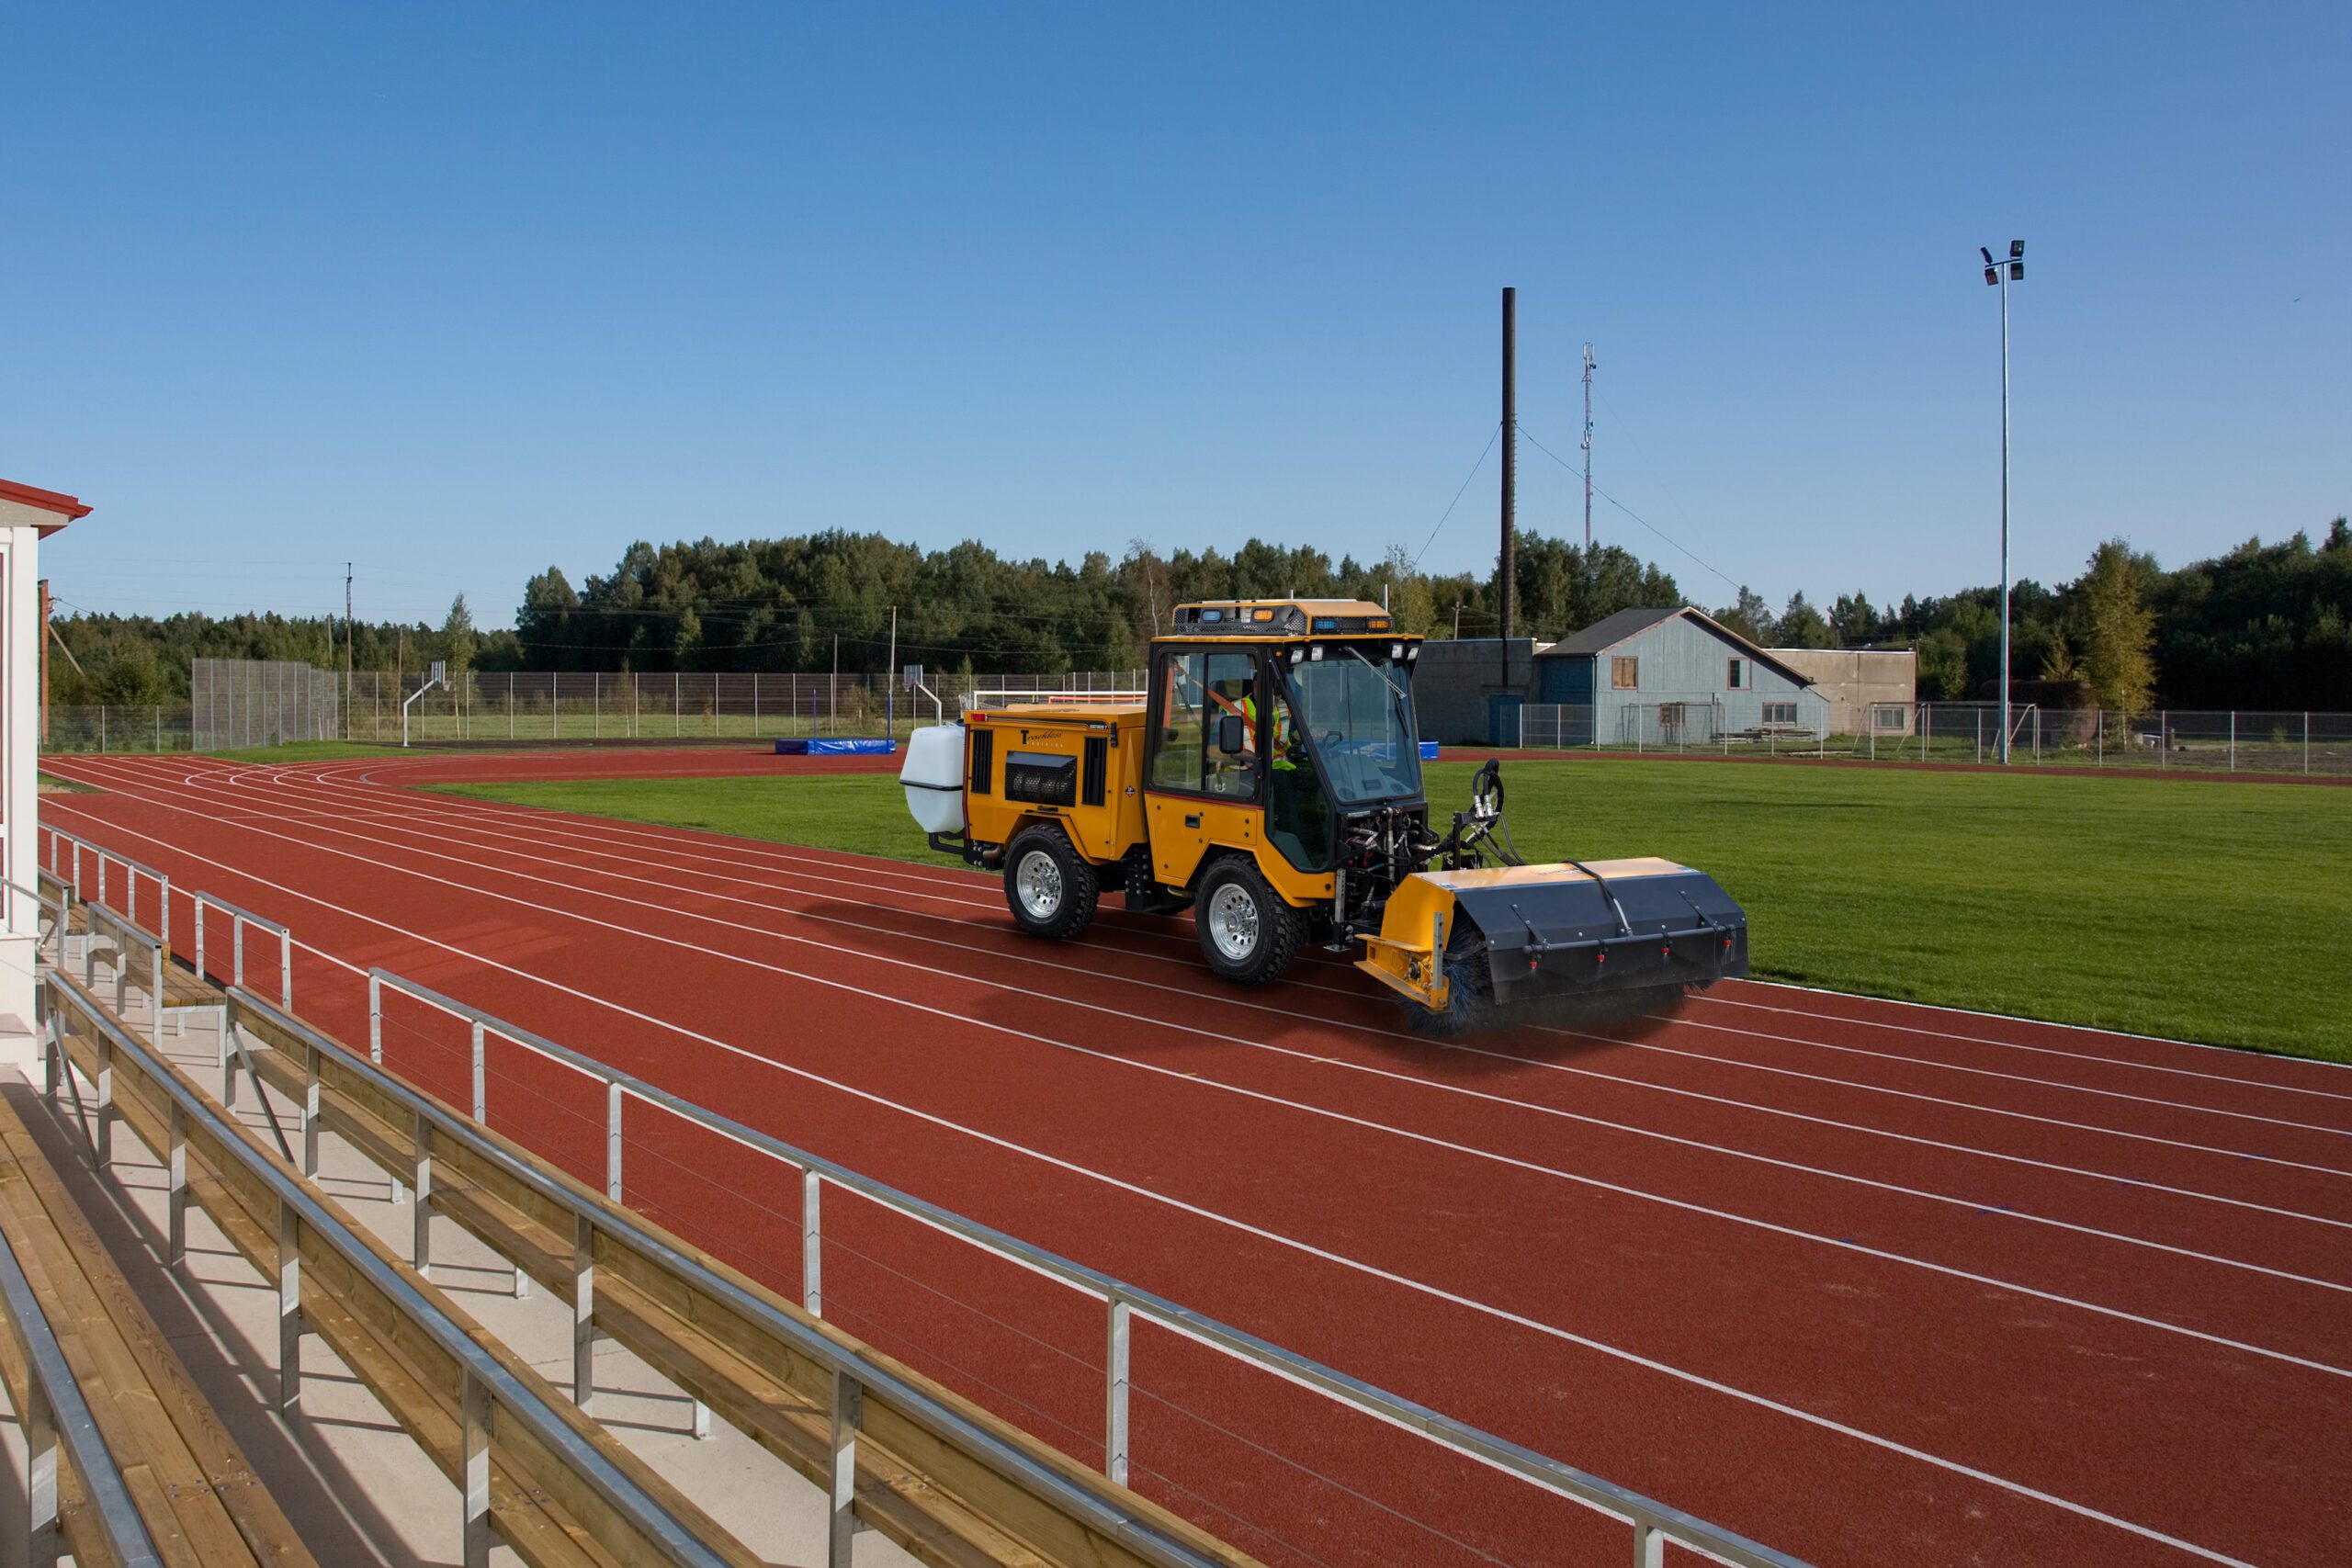 trackless vehicles power angle sweeper attachment sweeping dirt and debris from a university or college sports running track